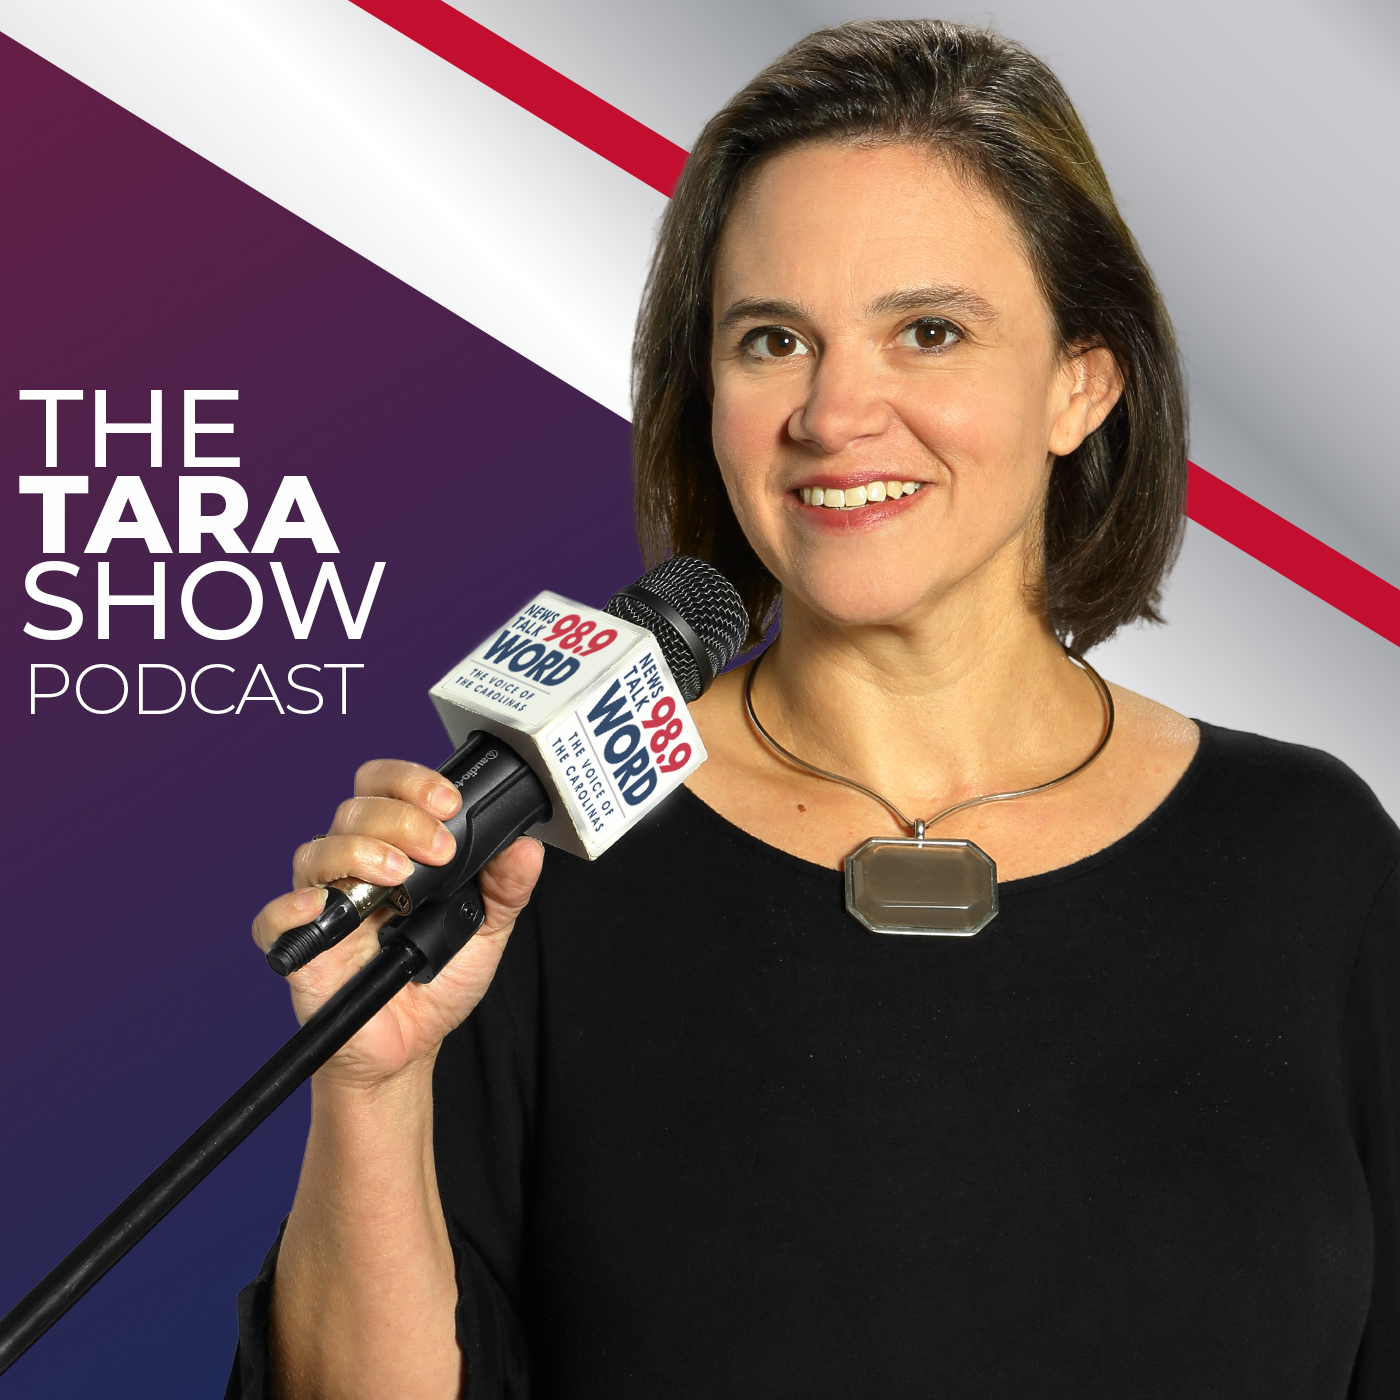 Hour 3: The Tara Show - “Lee Rogers New Songs” “AI Song Writing with Producer Tim” “Monetizing AI Creations” “The SC Voting Districts” 